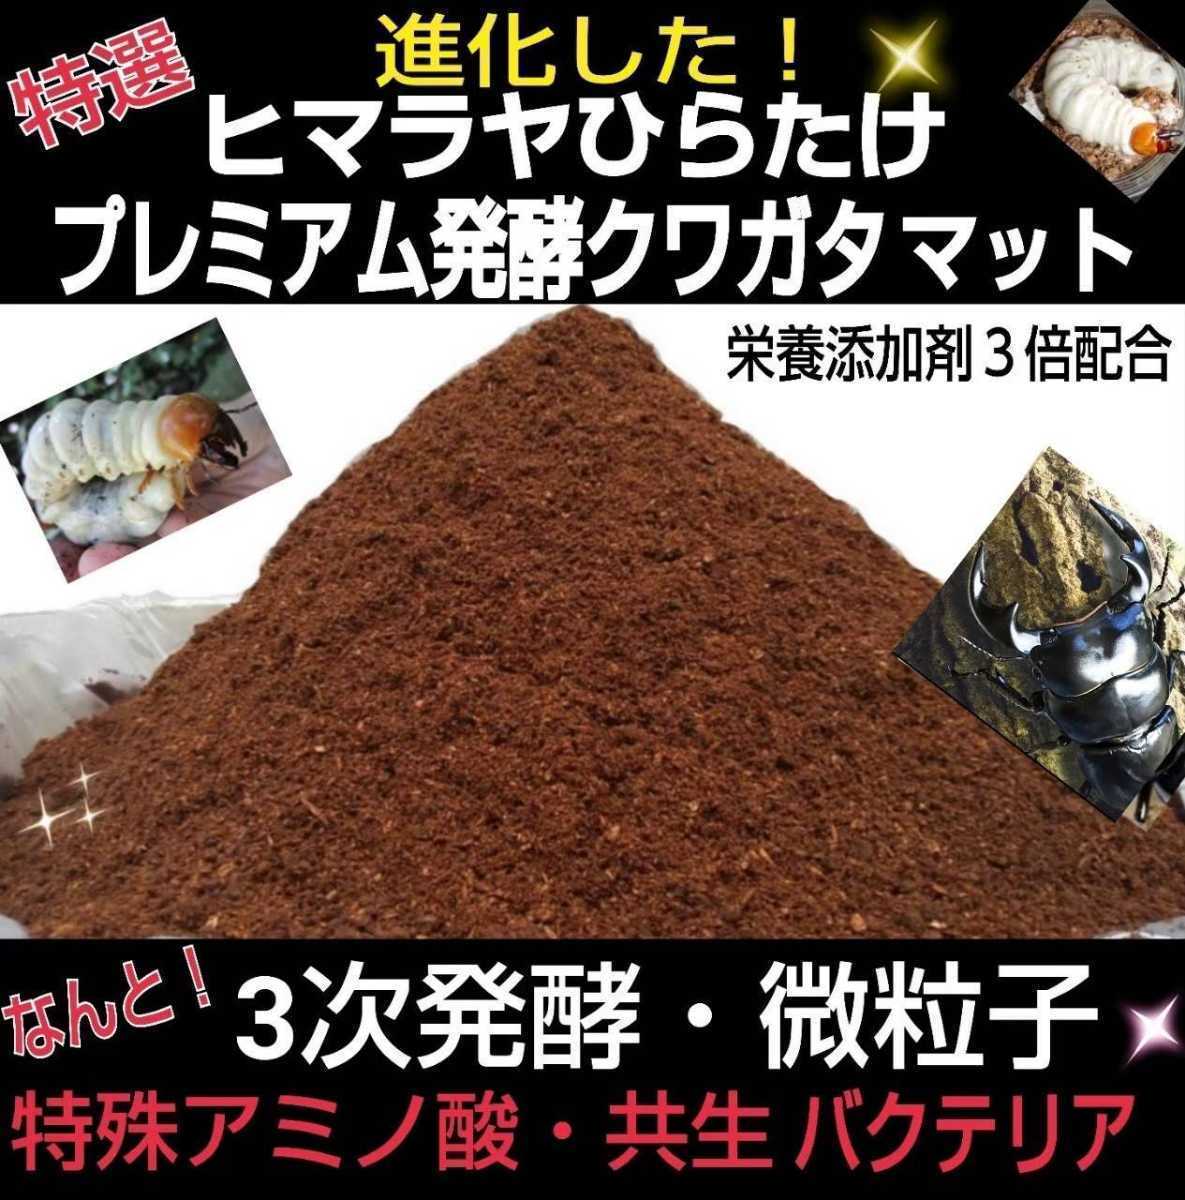  evolved! special selection premium 3 next departure . stag beetle mat nutrition addition agent * symbiosis bacteria 3 times combination!tore Hello s* special amino acid strengthen bin .... only 